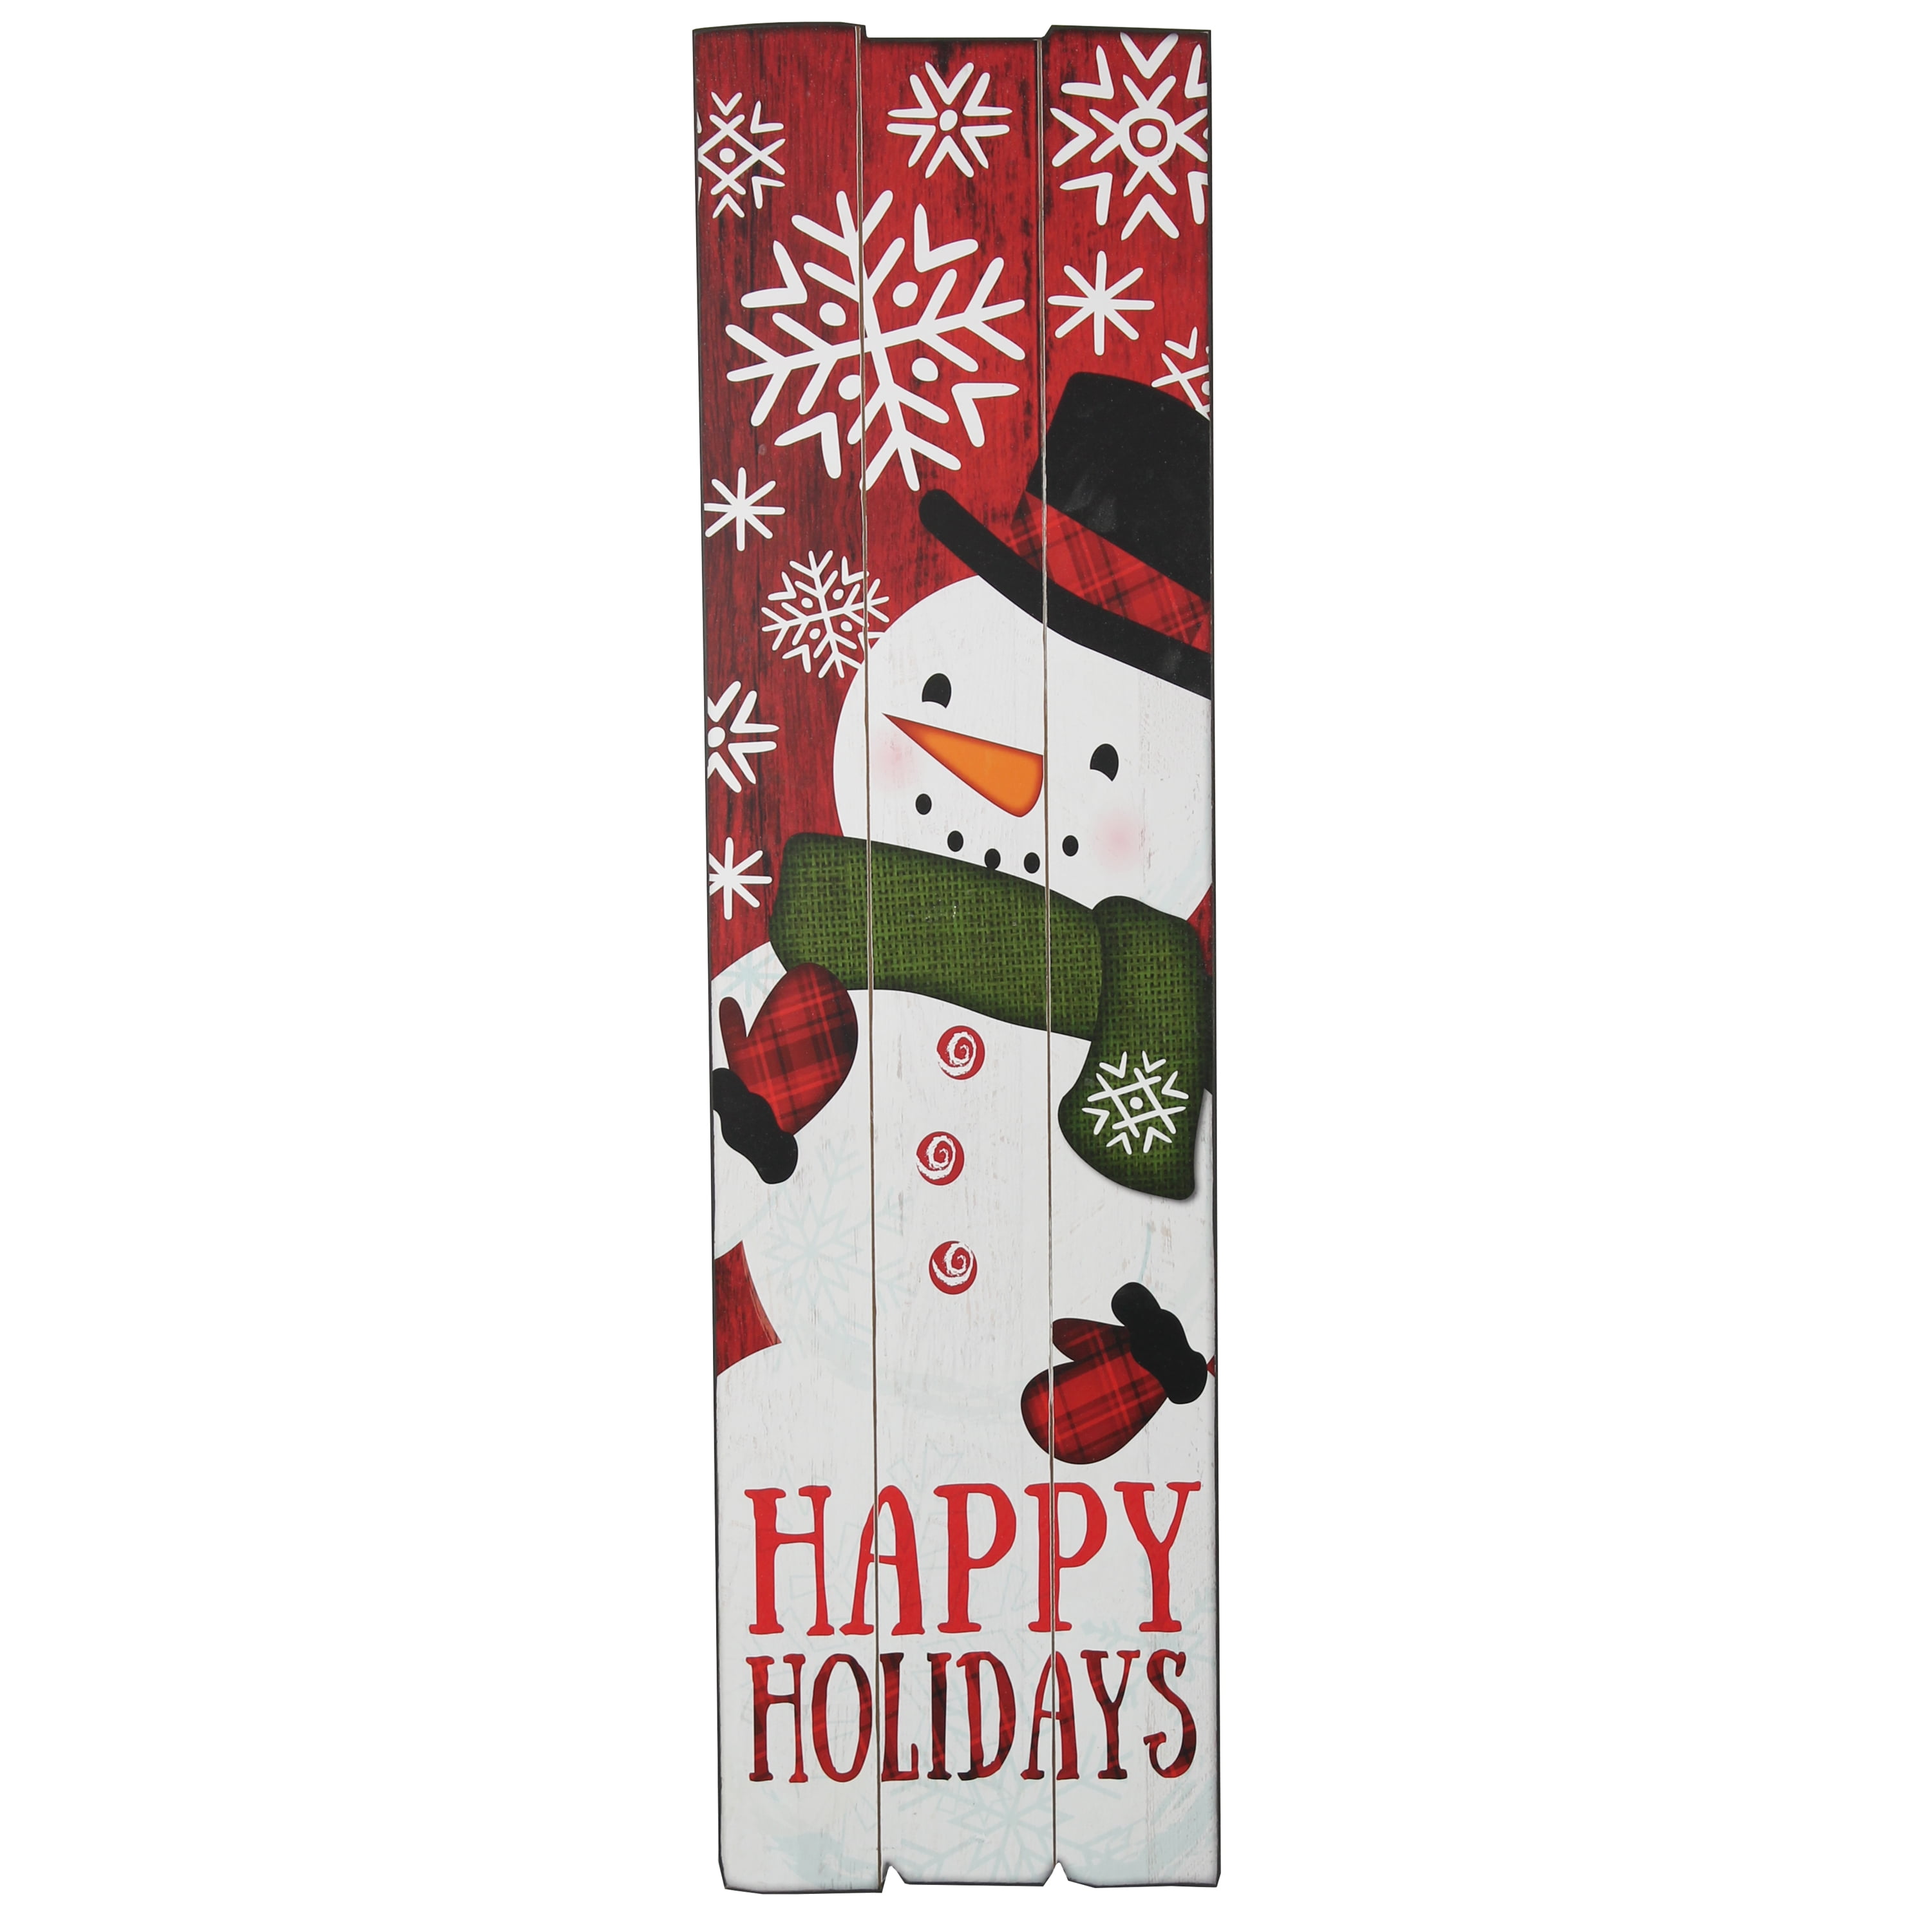 HOLIDAY TIME HAPPY HOLIDAYS DISTRESSED WOOD SIGN, 12 X 44 INCH ...